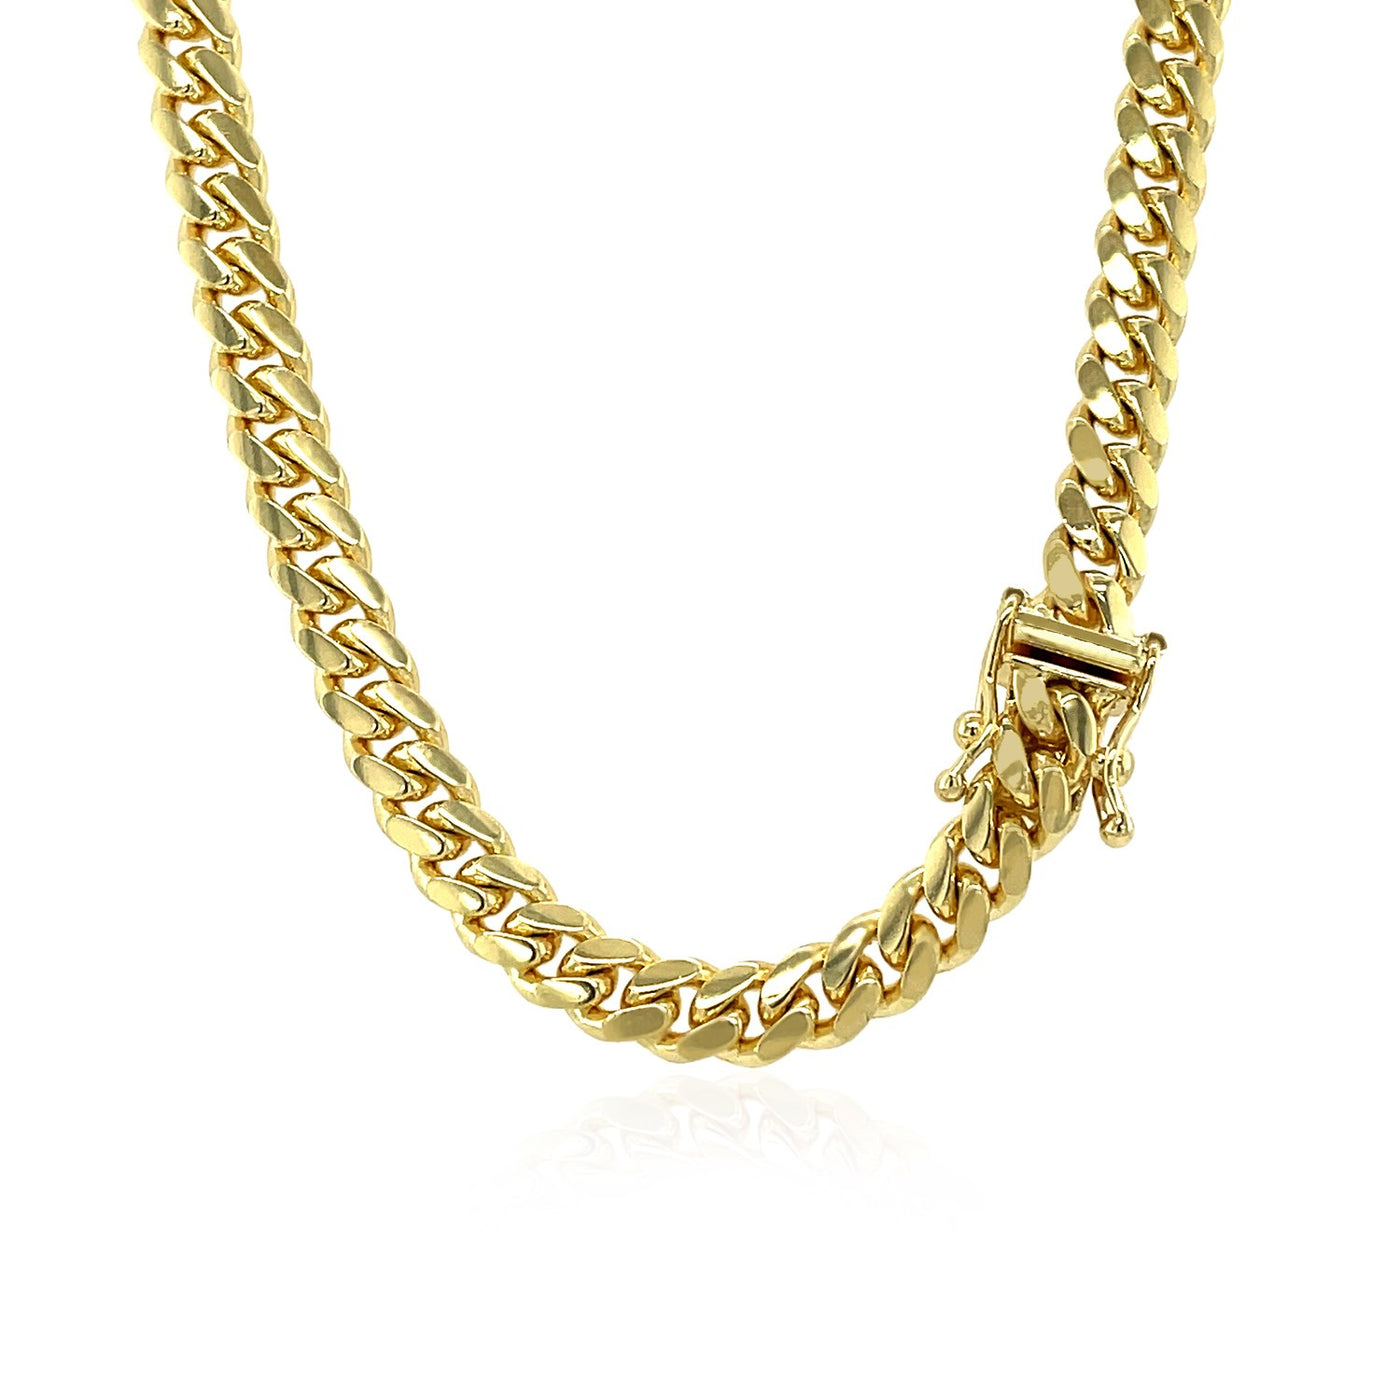 5mm 14k Yellow Gold Classic Miami Cuban Solid Chain